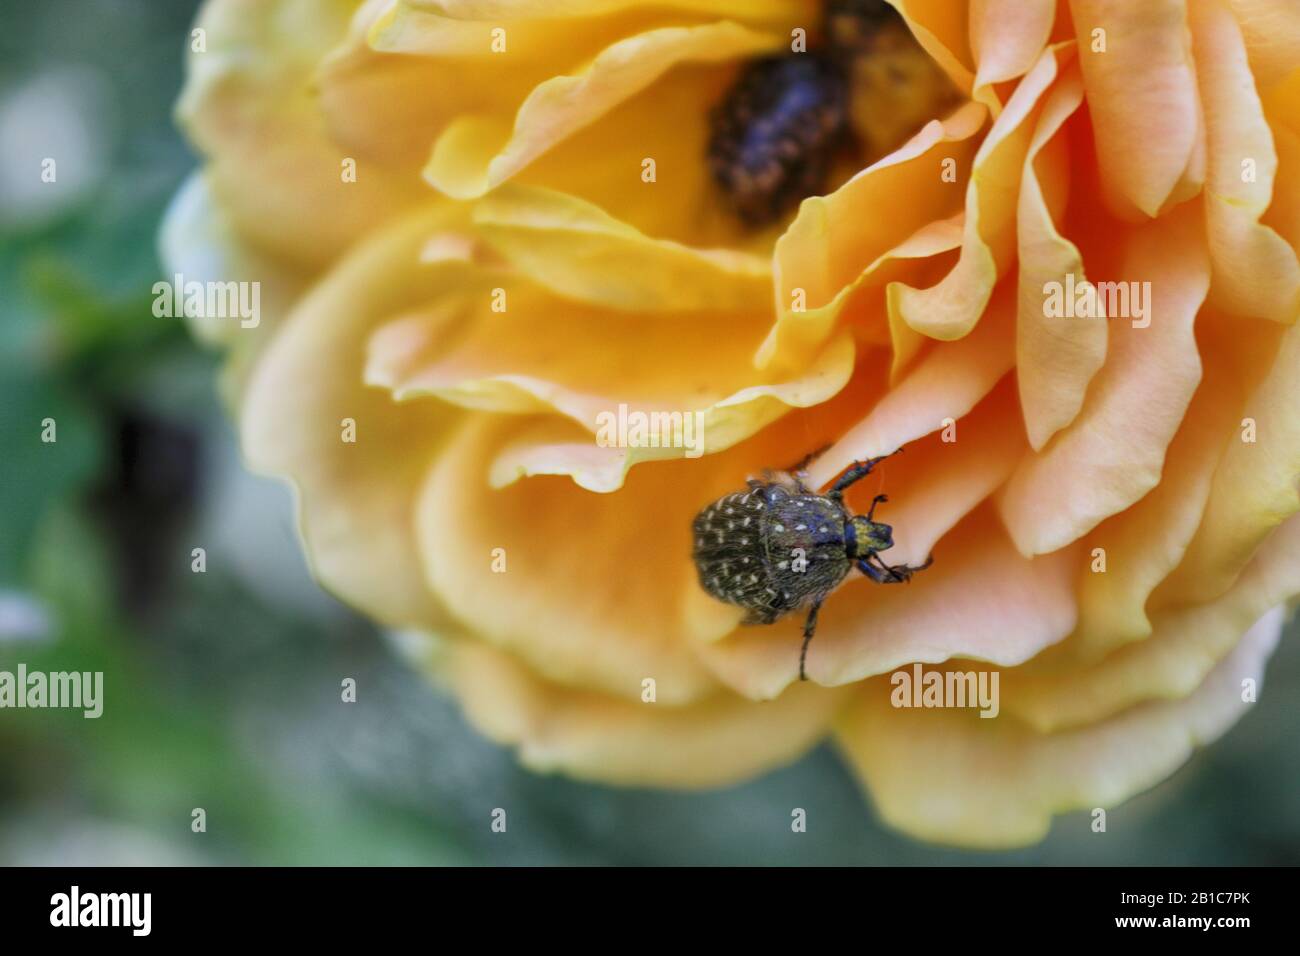 beetle on a rose flower. Green rose chafer or cetonia aurata on yellw rose Stock Photo